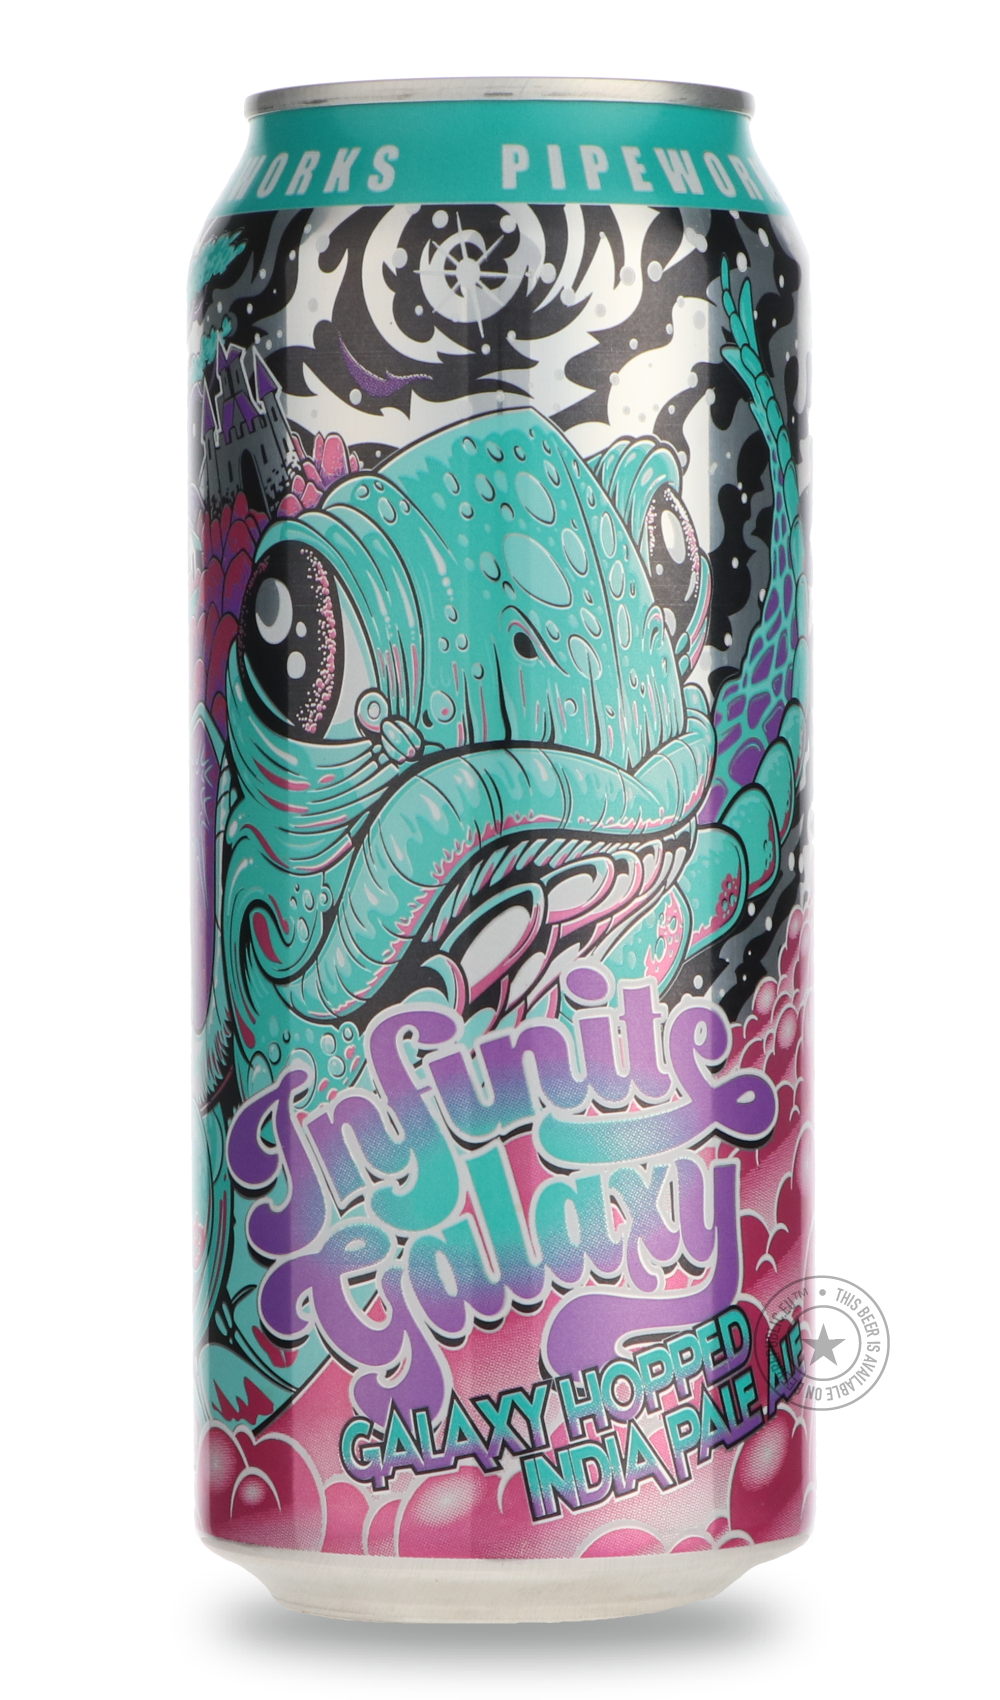 -Pipeworks- Infinite Galaxy-IPA- Only @ Beer Republic - The best online beer store for American & Canadian craft beer - Buy beer online from the USA and Canada - Bier online kopen - Amerikaans bier kopen - Craft beer store - Craft beer kopen - Amerikanisch bier kaufen - Bier online kaufen - Acheter biere online - IPA - Stout - Porter - New England IPA - Hazy IPA - Imperial Stout - Barrel Aged - Barrel Aged Imperial Stout - Brown - Dark beer - Blond - Blonde - Pilsner - Lager - Wheat - Weizen - Amber - Barle